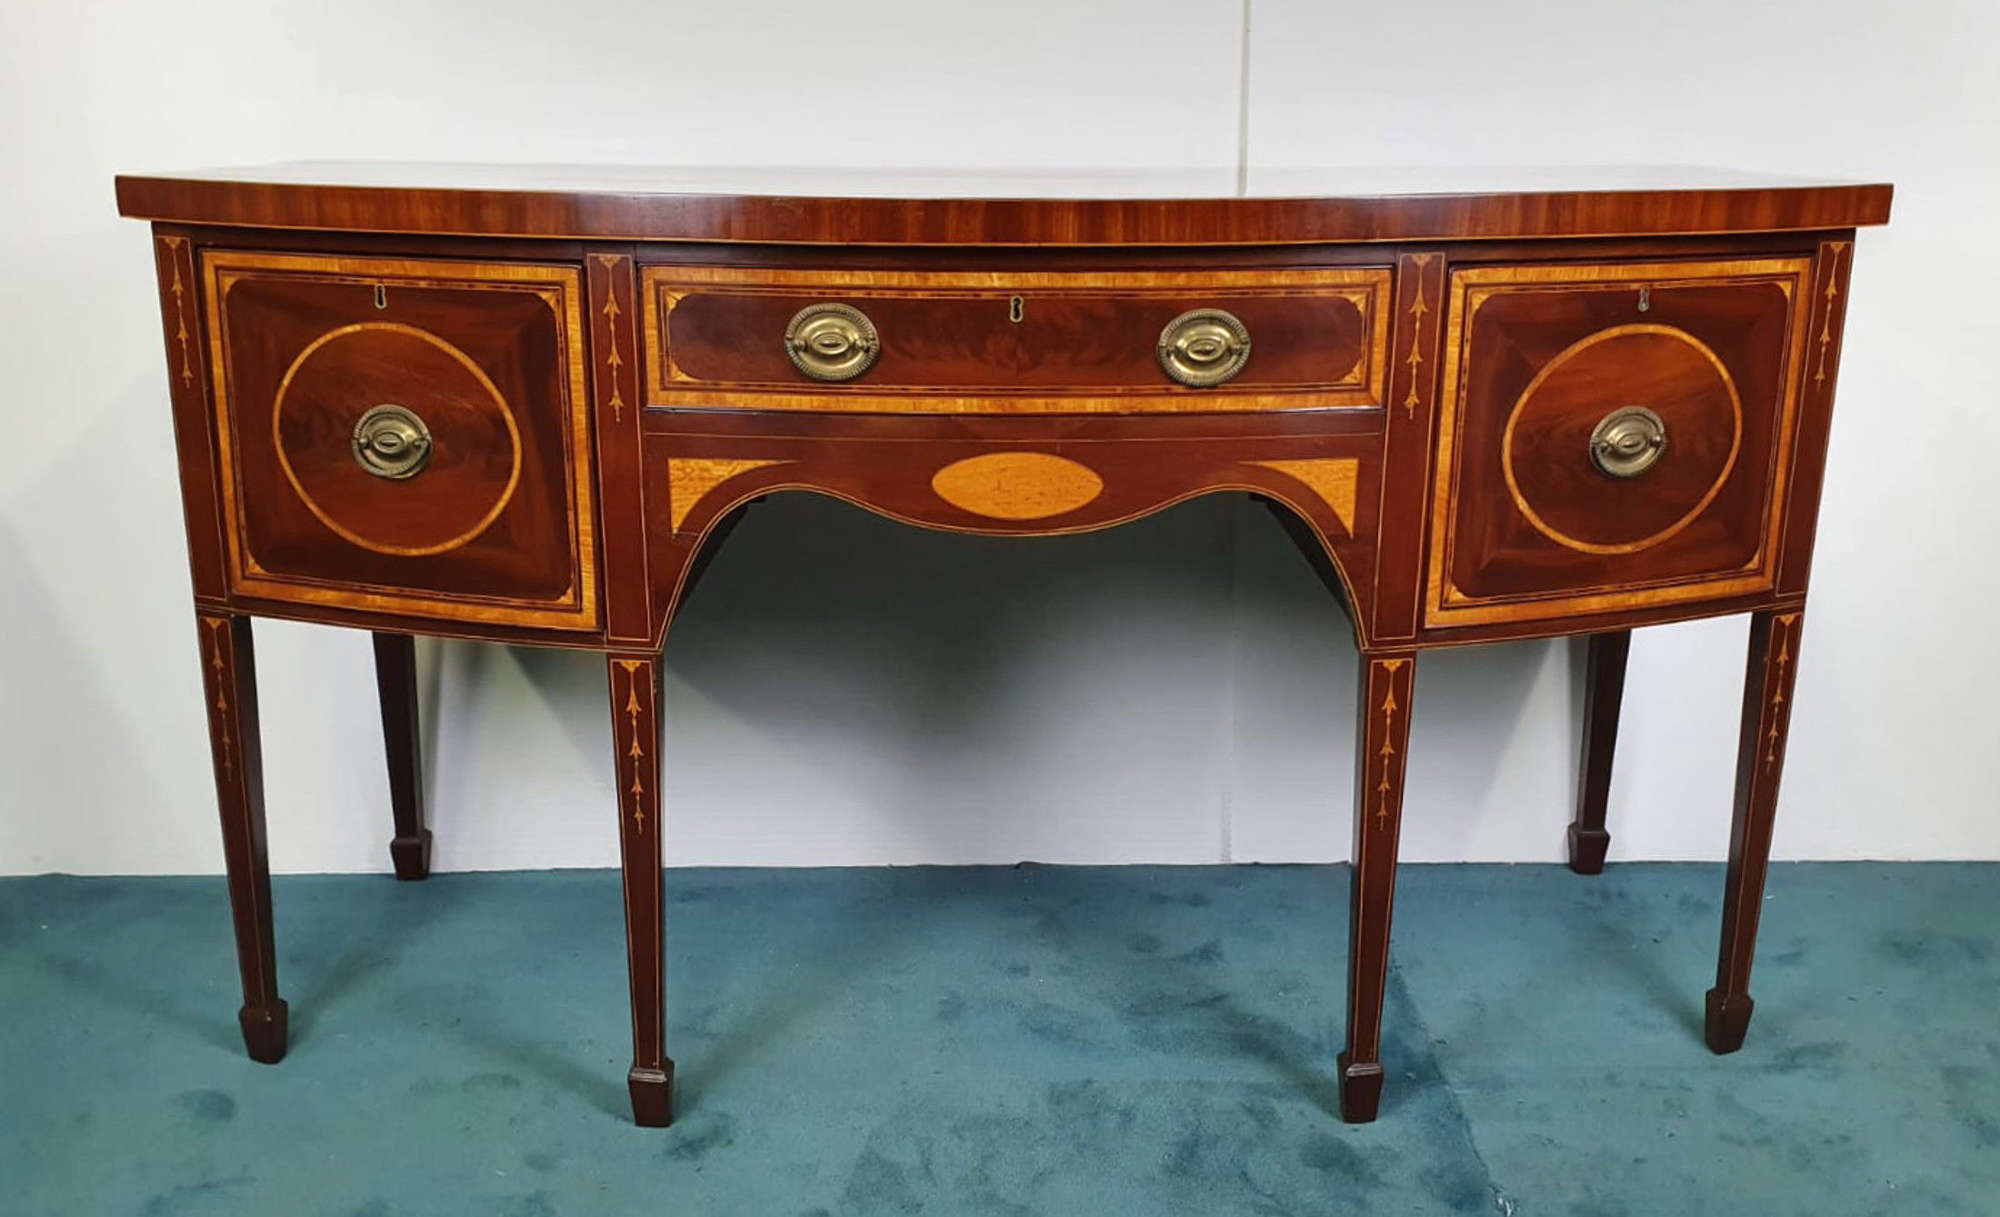 19th Century Inlaid Mahogany Bowfront Antique Sideboard